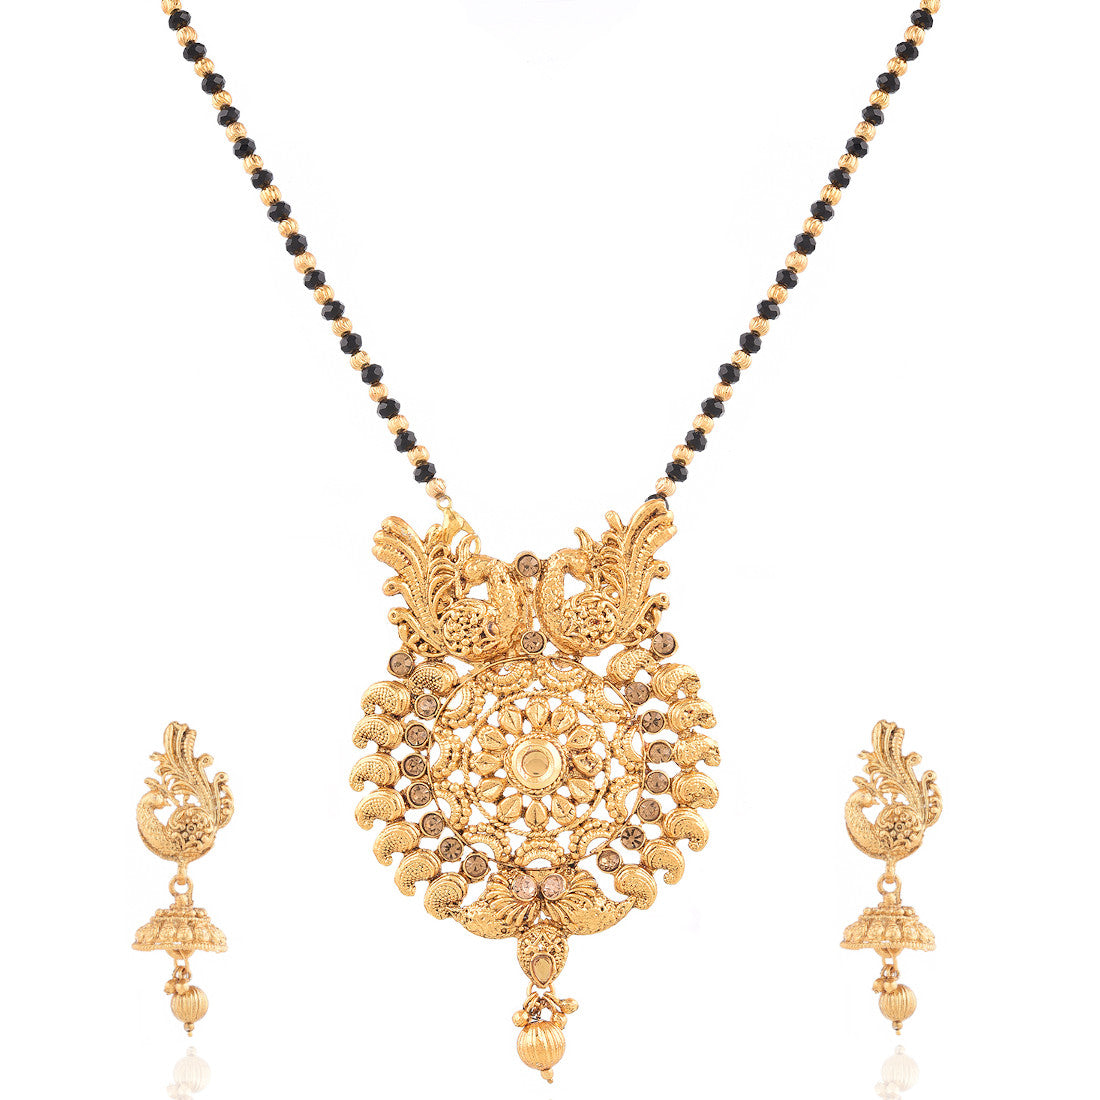 Mangalsutra with Earrings for Women | Buy This Jewellery Online from Mekkna